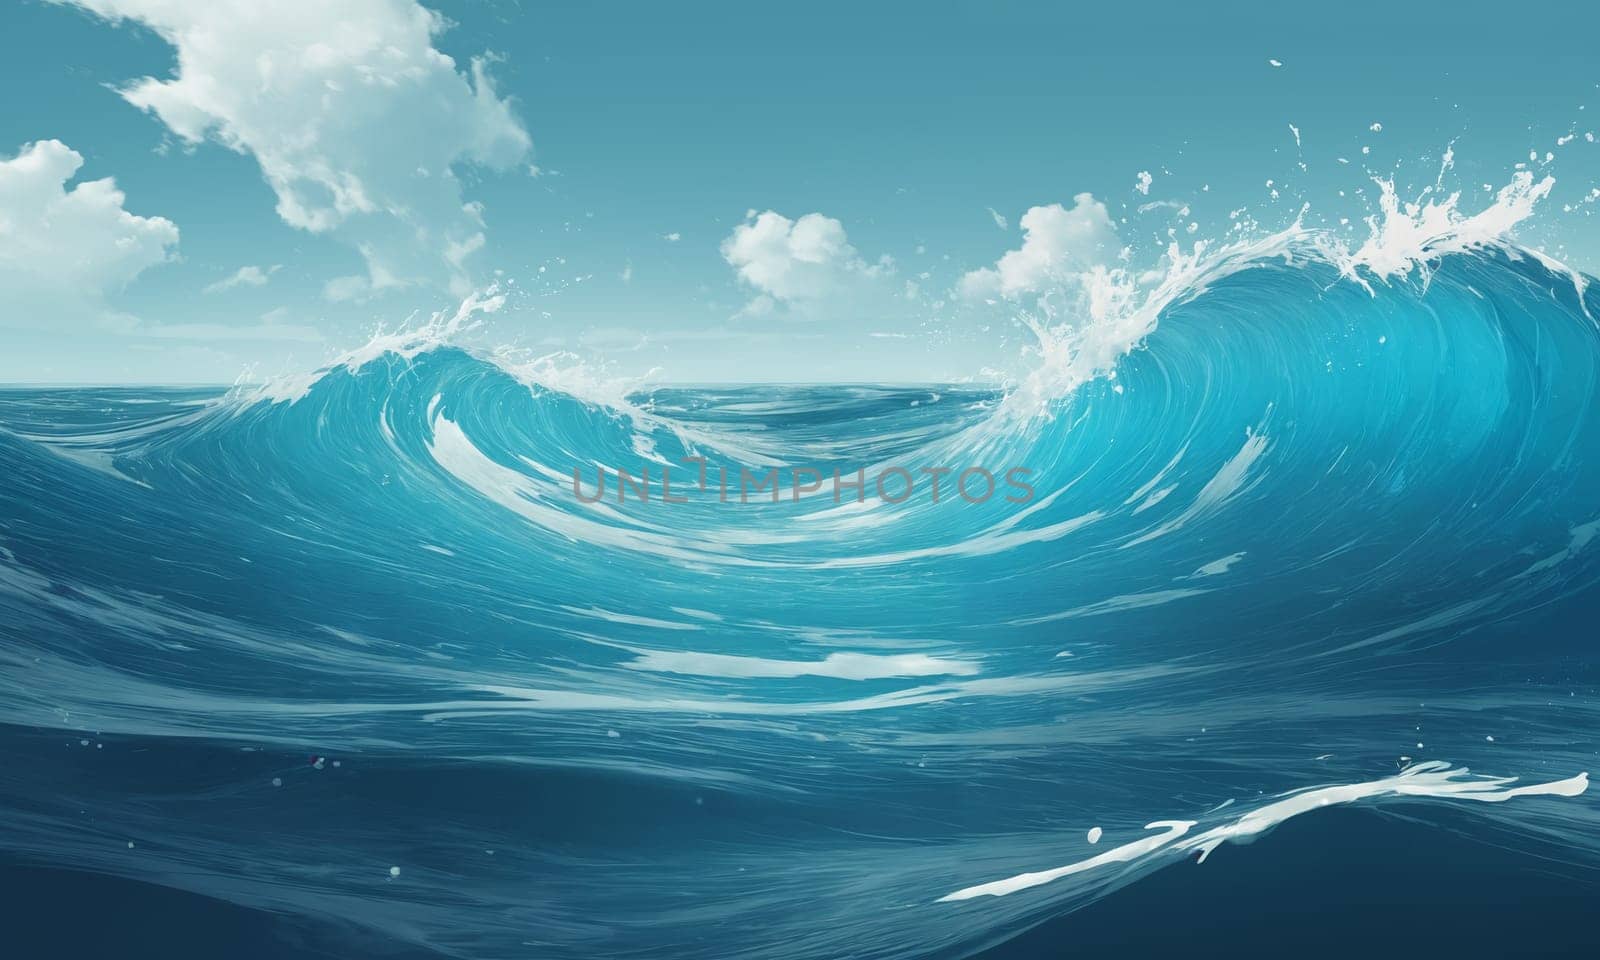 Blue ocean wave with white clouds and blue sky. illustration.